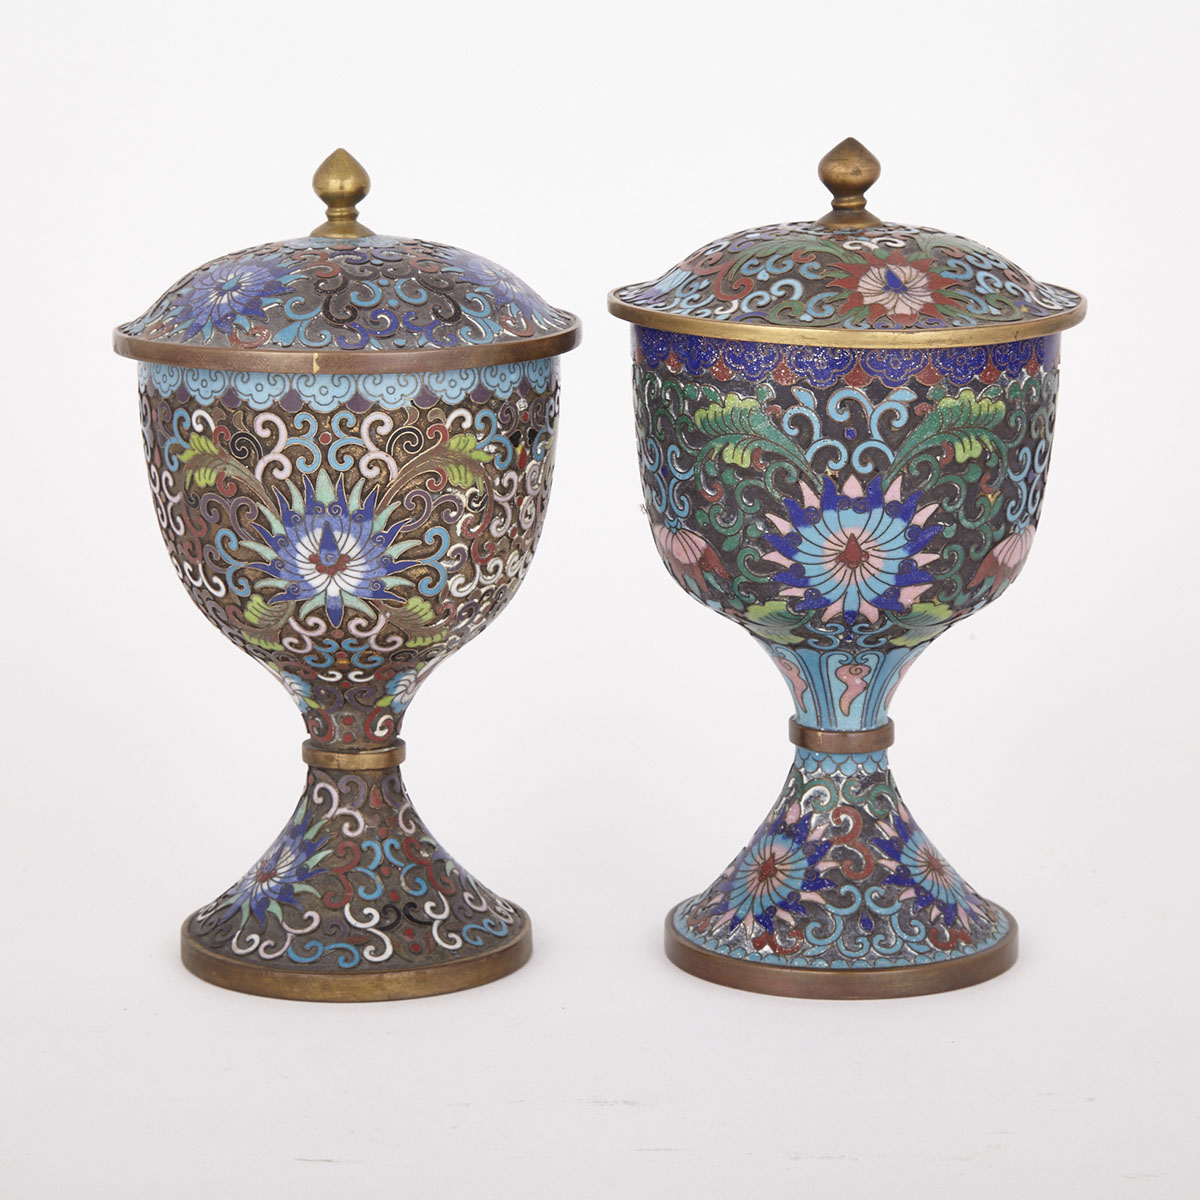 Matched Pair of Cloisonne Chalices, early 20th Century